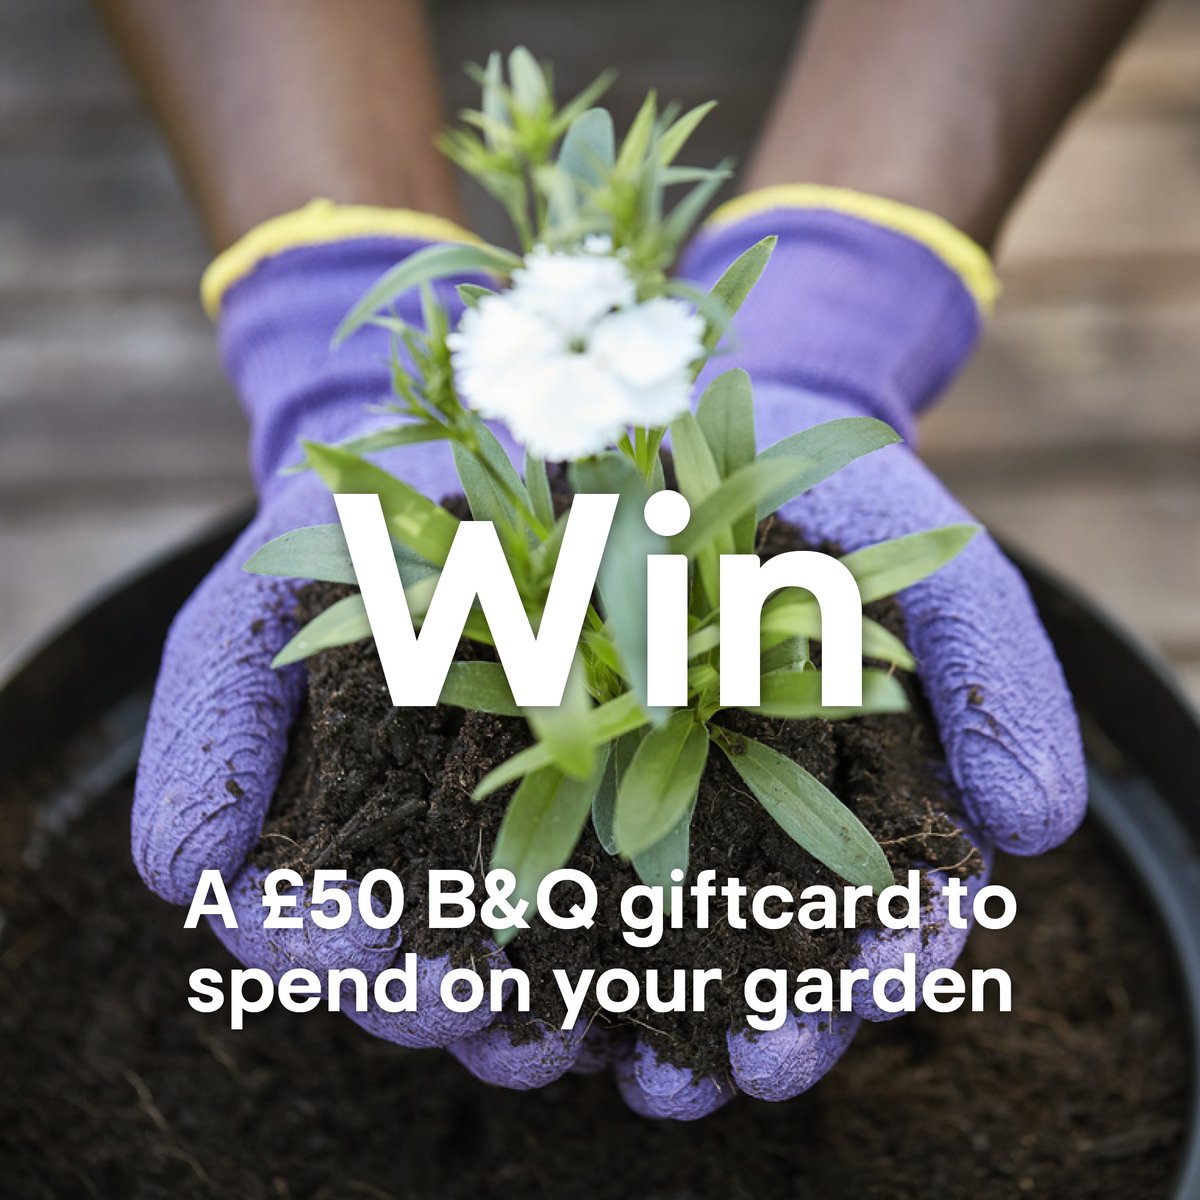 Say hello to the first day of spring with the chance to win a £50 B&Q gift card 🌸☀​ To enter: 1️⃣ Follow @BandQ 2️⃣ Like this post​ 3️⃣ Tag a friend who can't wait to get out into the garden ☀​​ Prize draw closes at 23:59 on 27 March 2024. Ts&Cs apply – bit.ly/3Pvvvlf